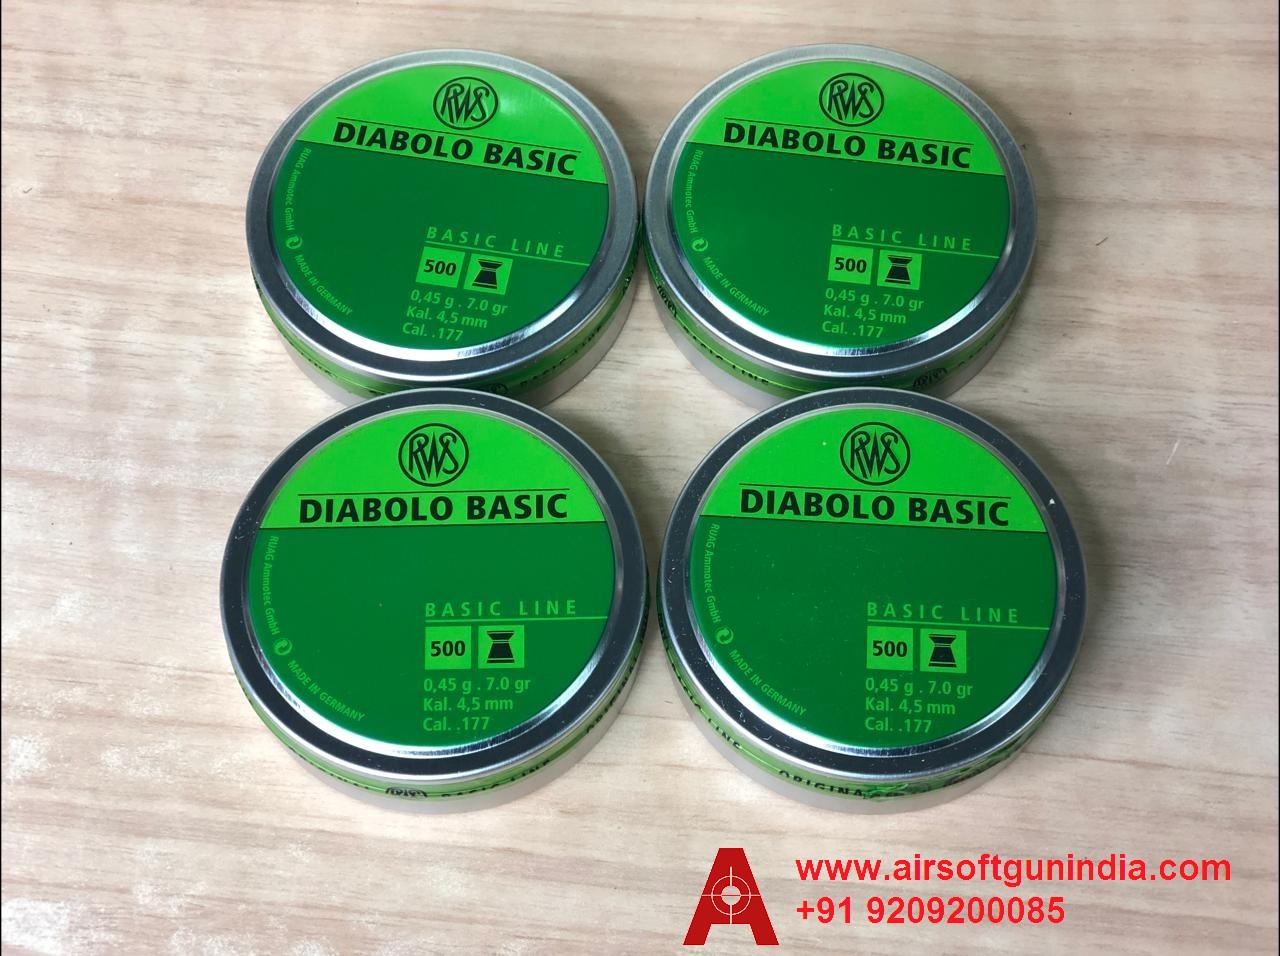 .177 RWS Diabolo Basic, Imported Pellet Pack Of 4 BY Airsoft Gun India